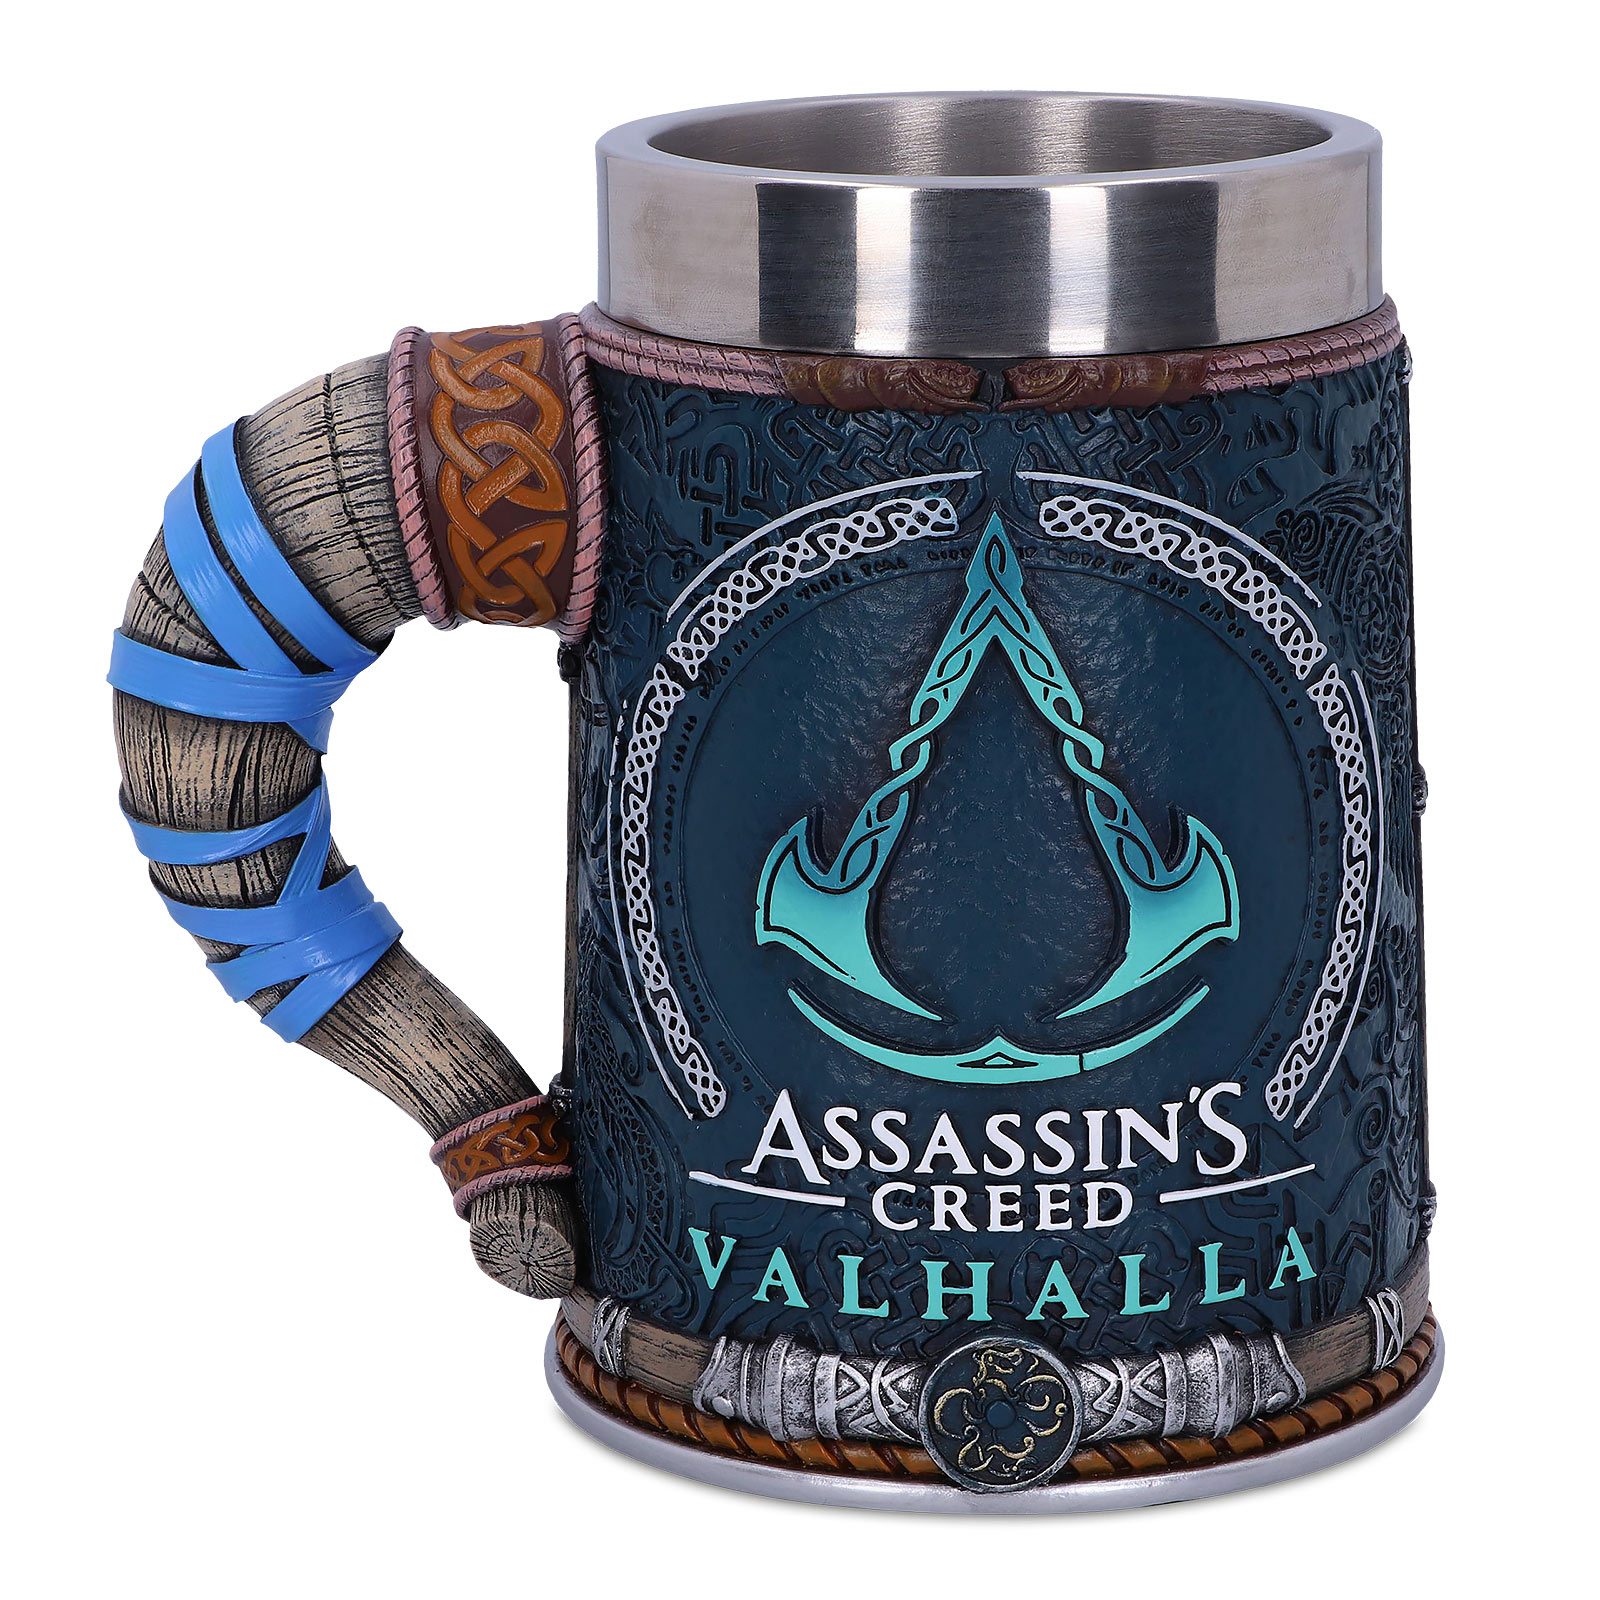 Assassin's Creed - Valhalla Logo Krug deluxe